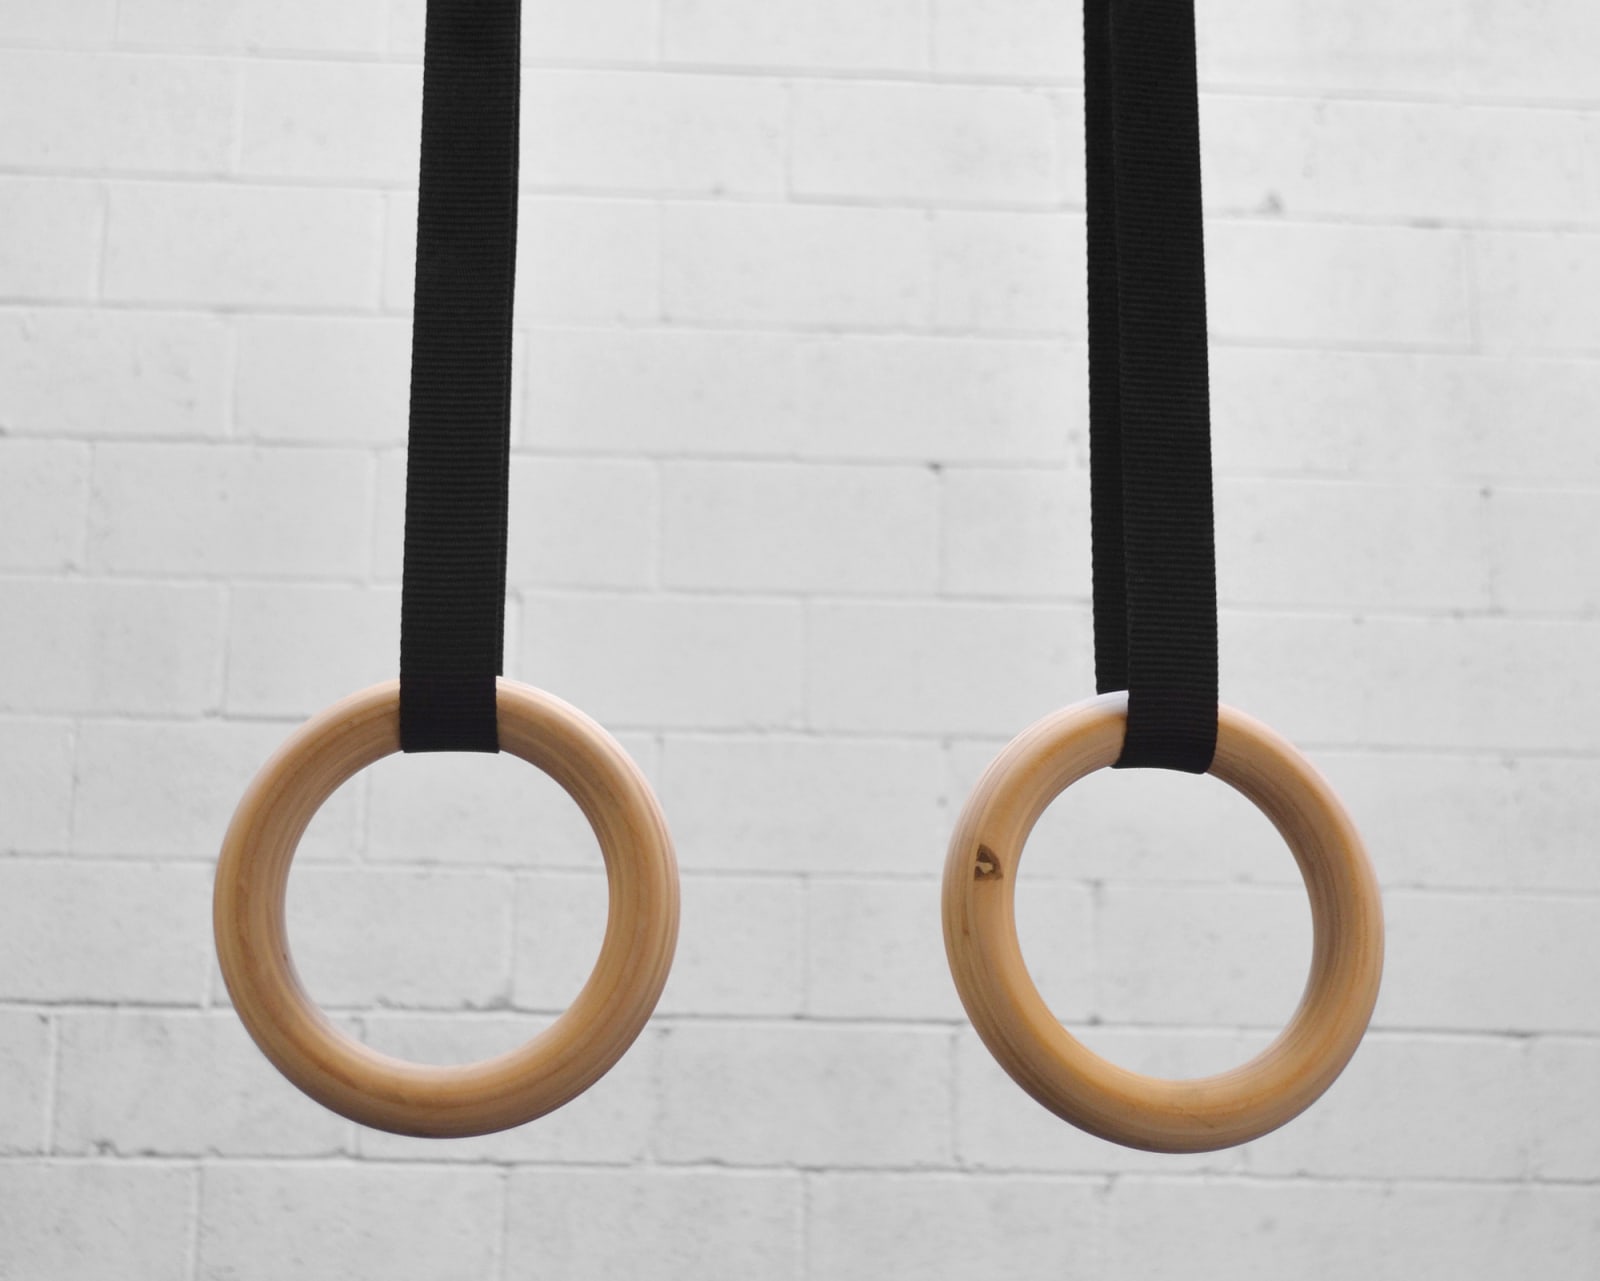 Gymnast Rings Exercise Rings Fitness Rings Garage Fit Wood Gym Rings Gym Ring Wooden Gymnastic Rings Gymnastics Rings 